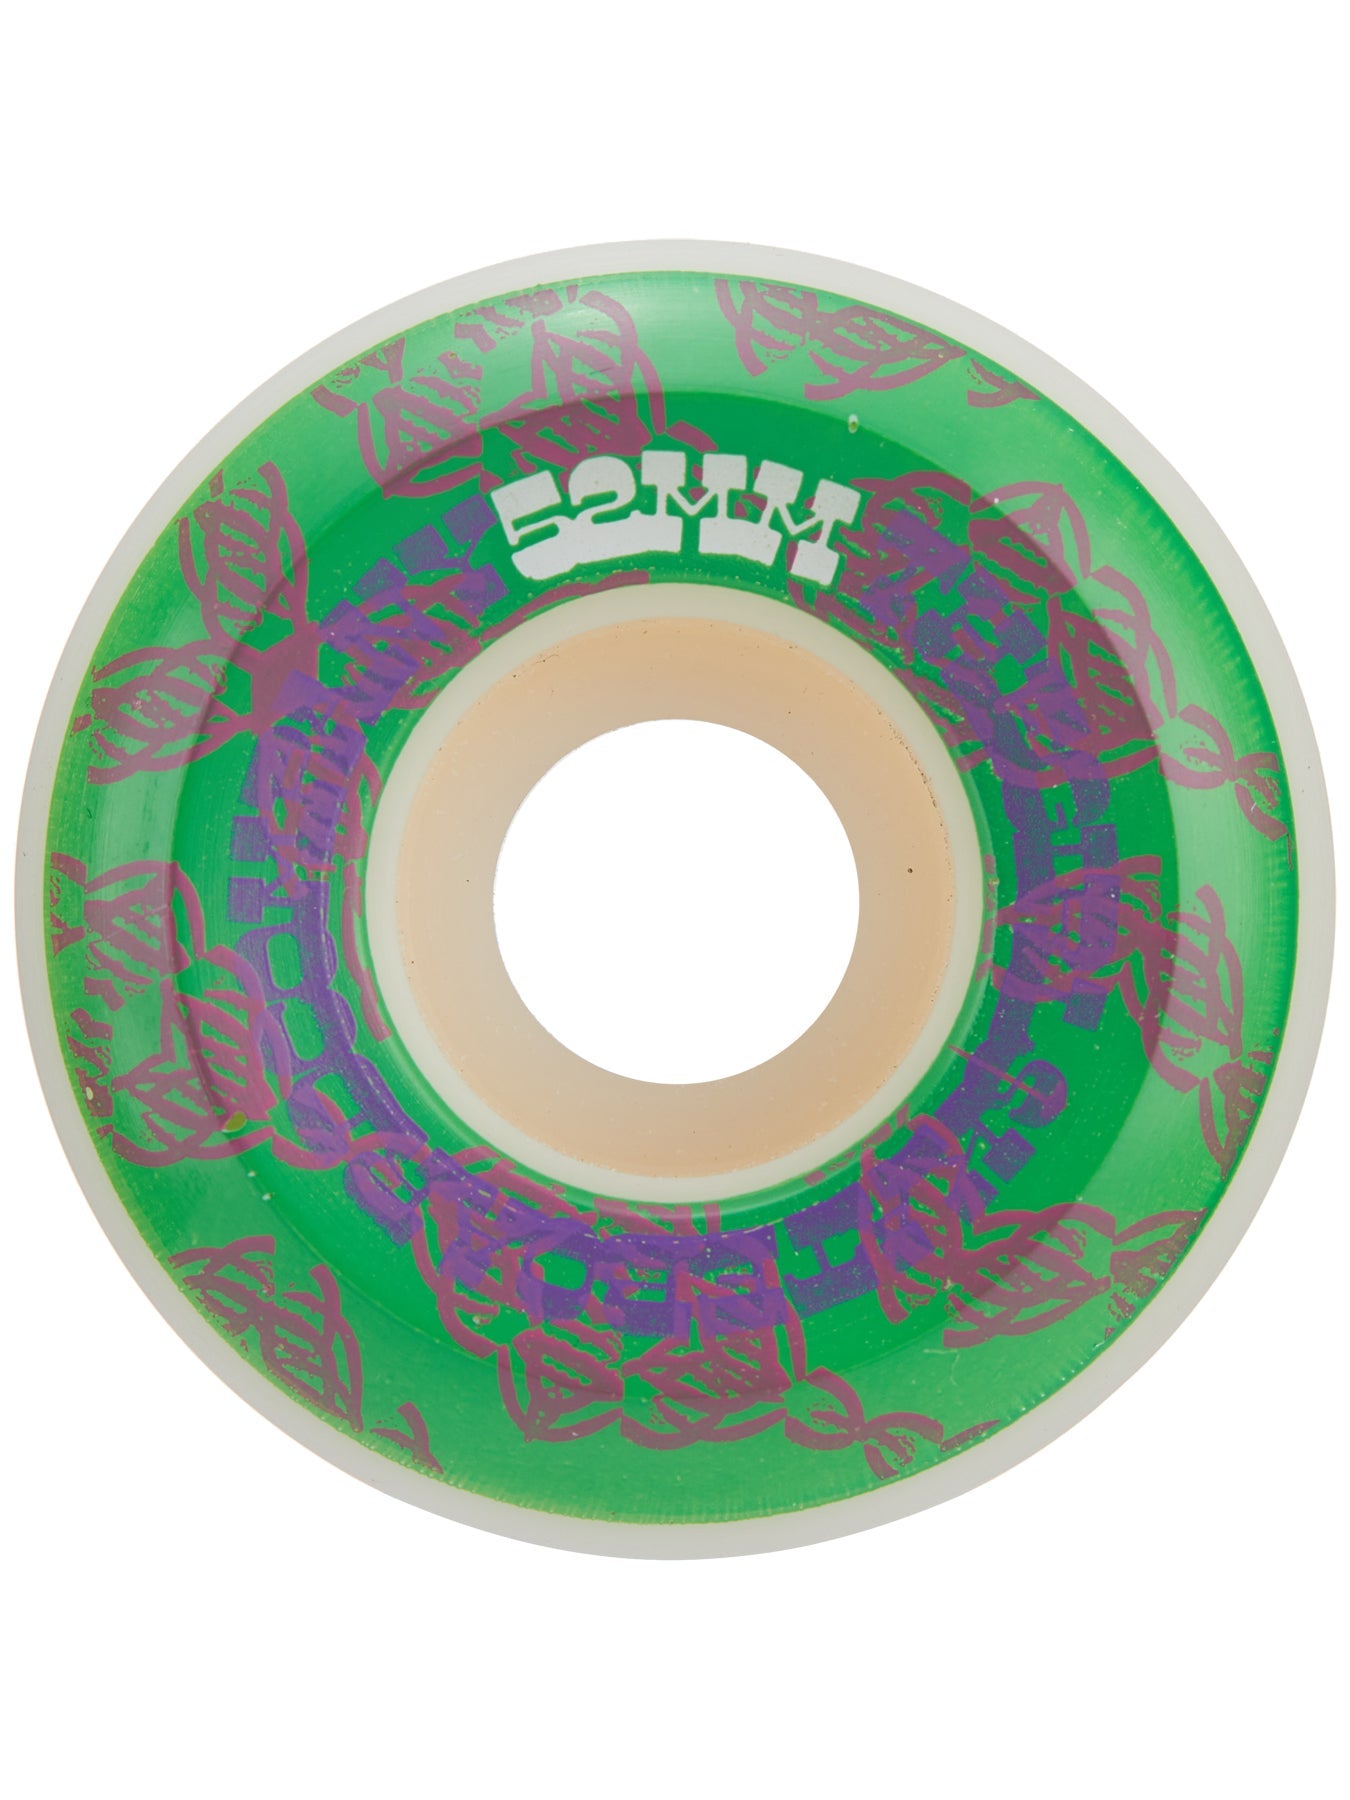 GIRL Vibrations Conical Wheels 52mm/99a